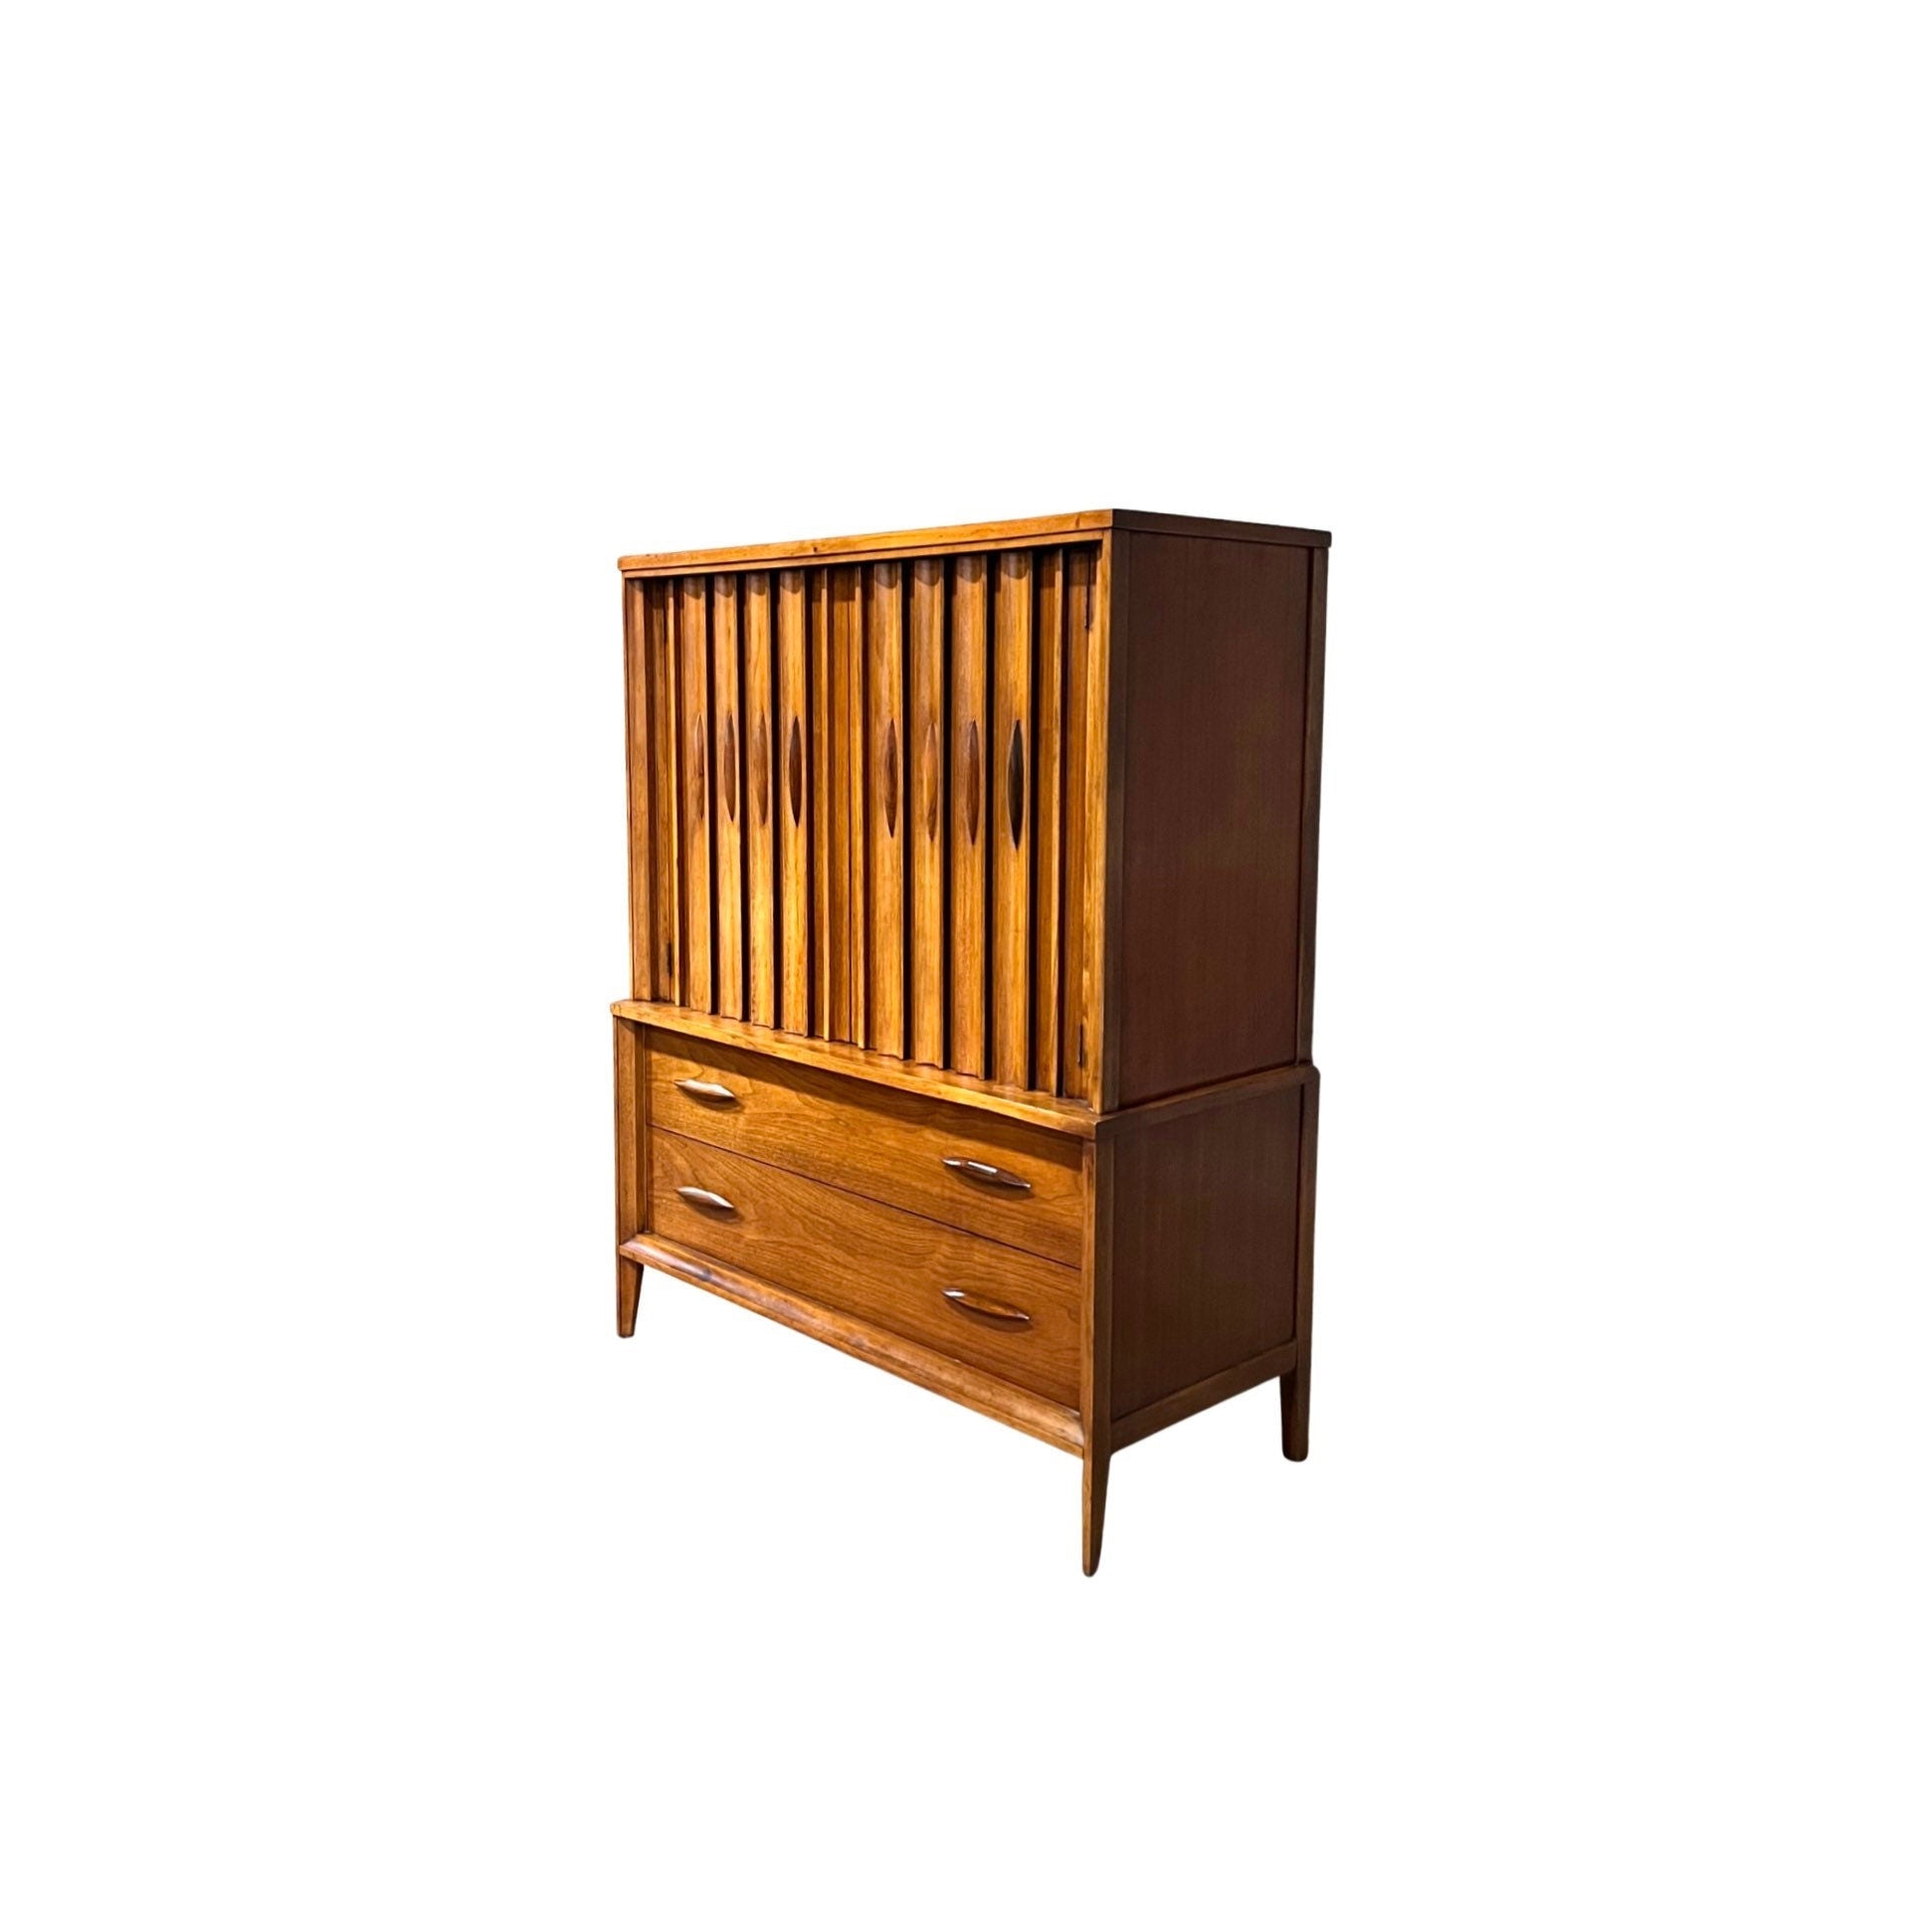 Thomasville vintage mid-century modern gentleman's chest with elegant walnut wood and rosewood embellishments, offering ample storage space